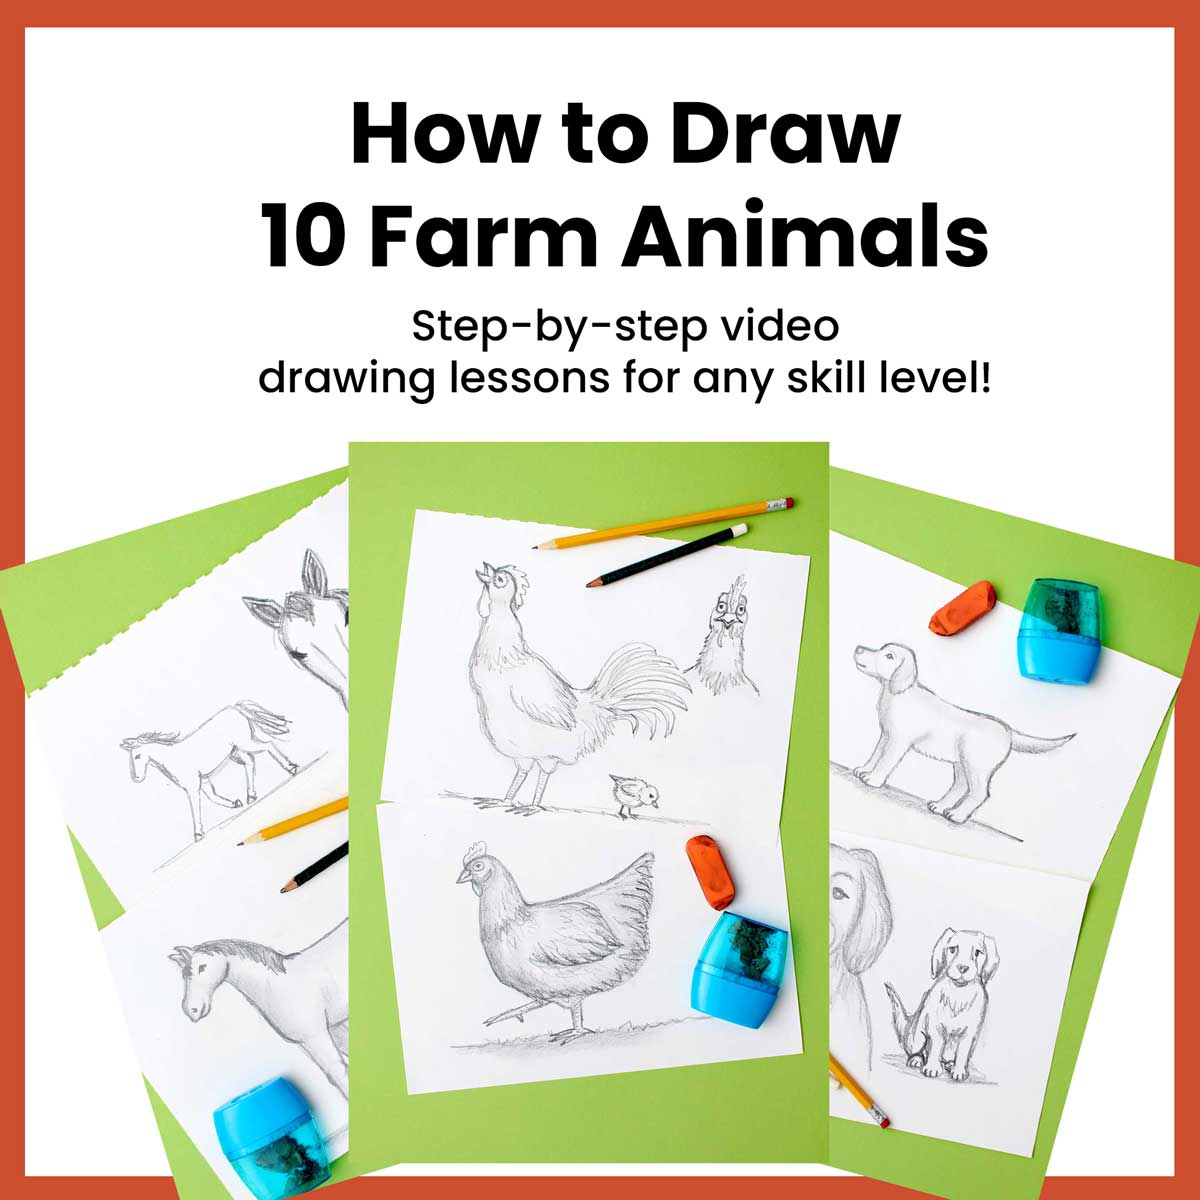 Sketches of a chicken, horse, and dog, with a message selling a course on how to draw 10 farm animals.